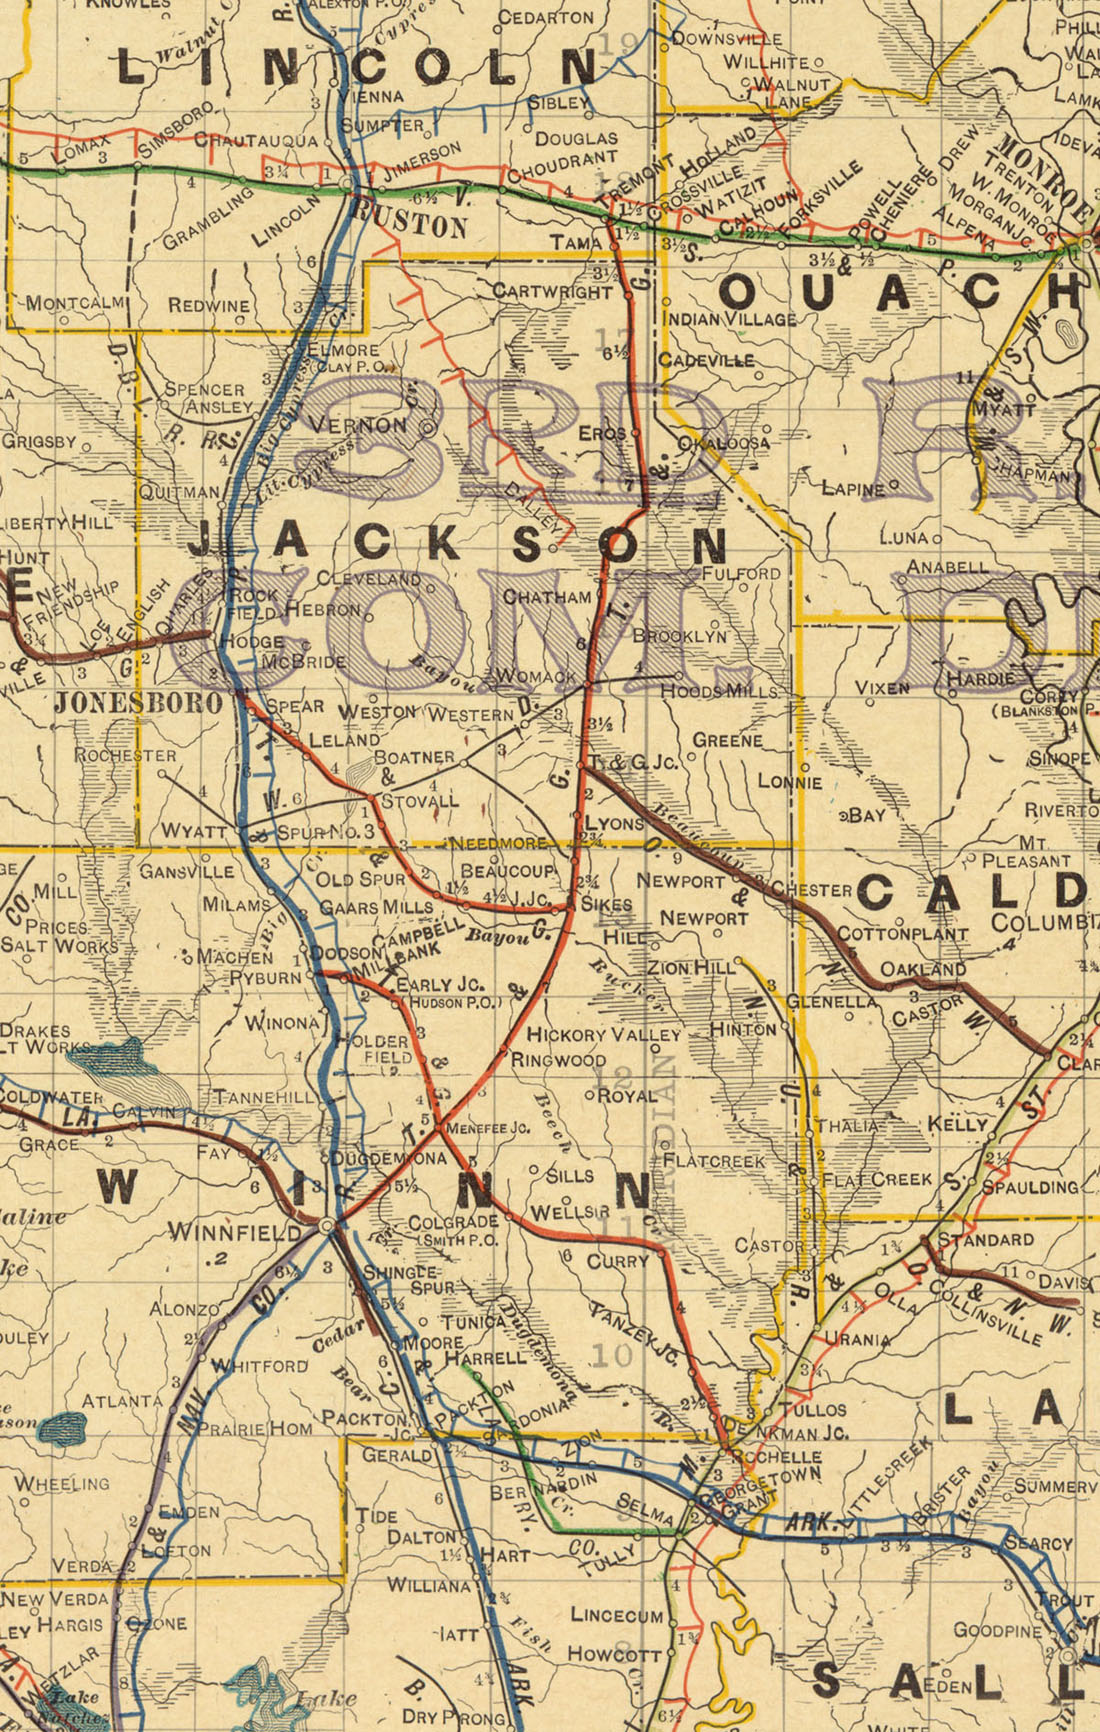 Tremont & Gulf Railway Company (La.), Map Showing Route in 1913.